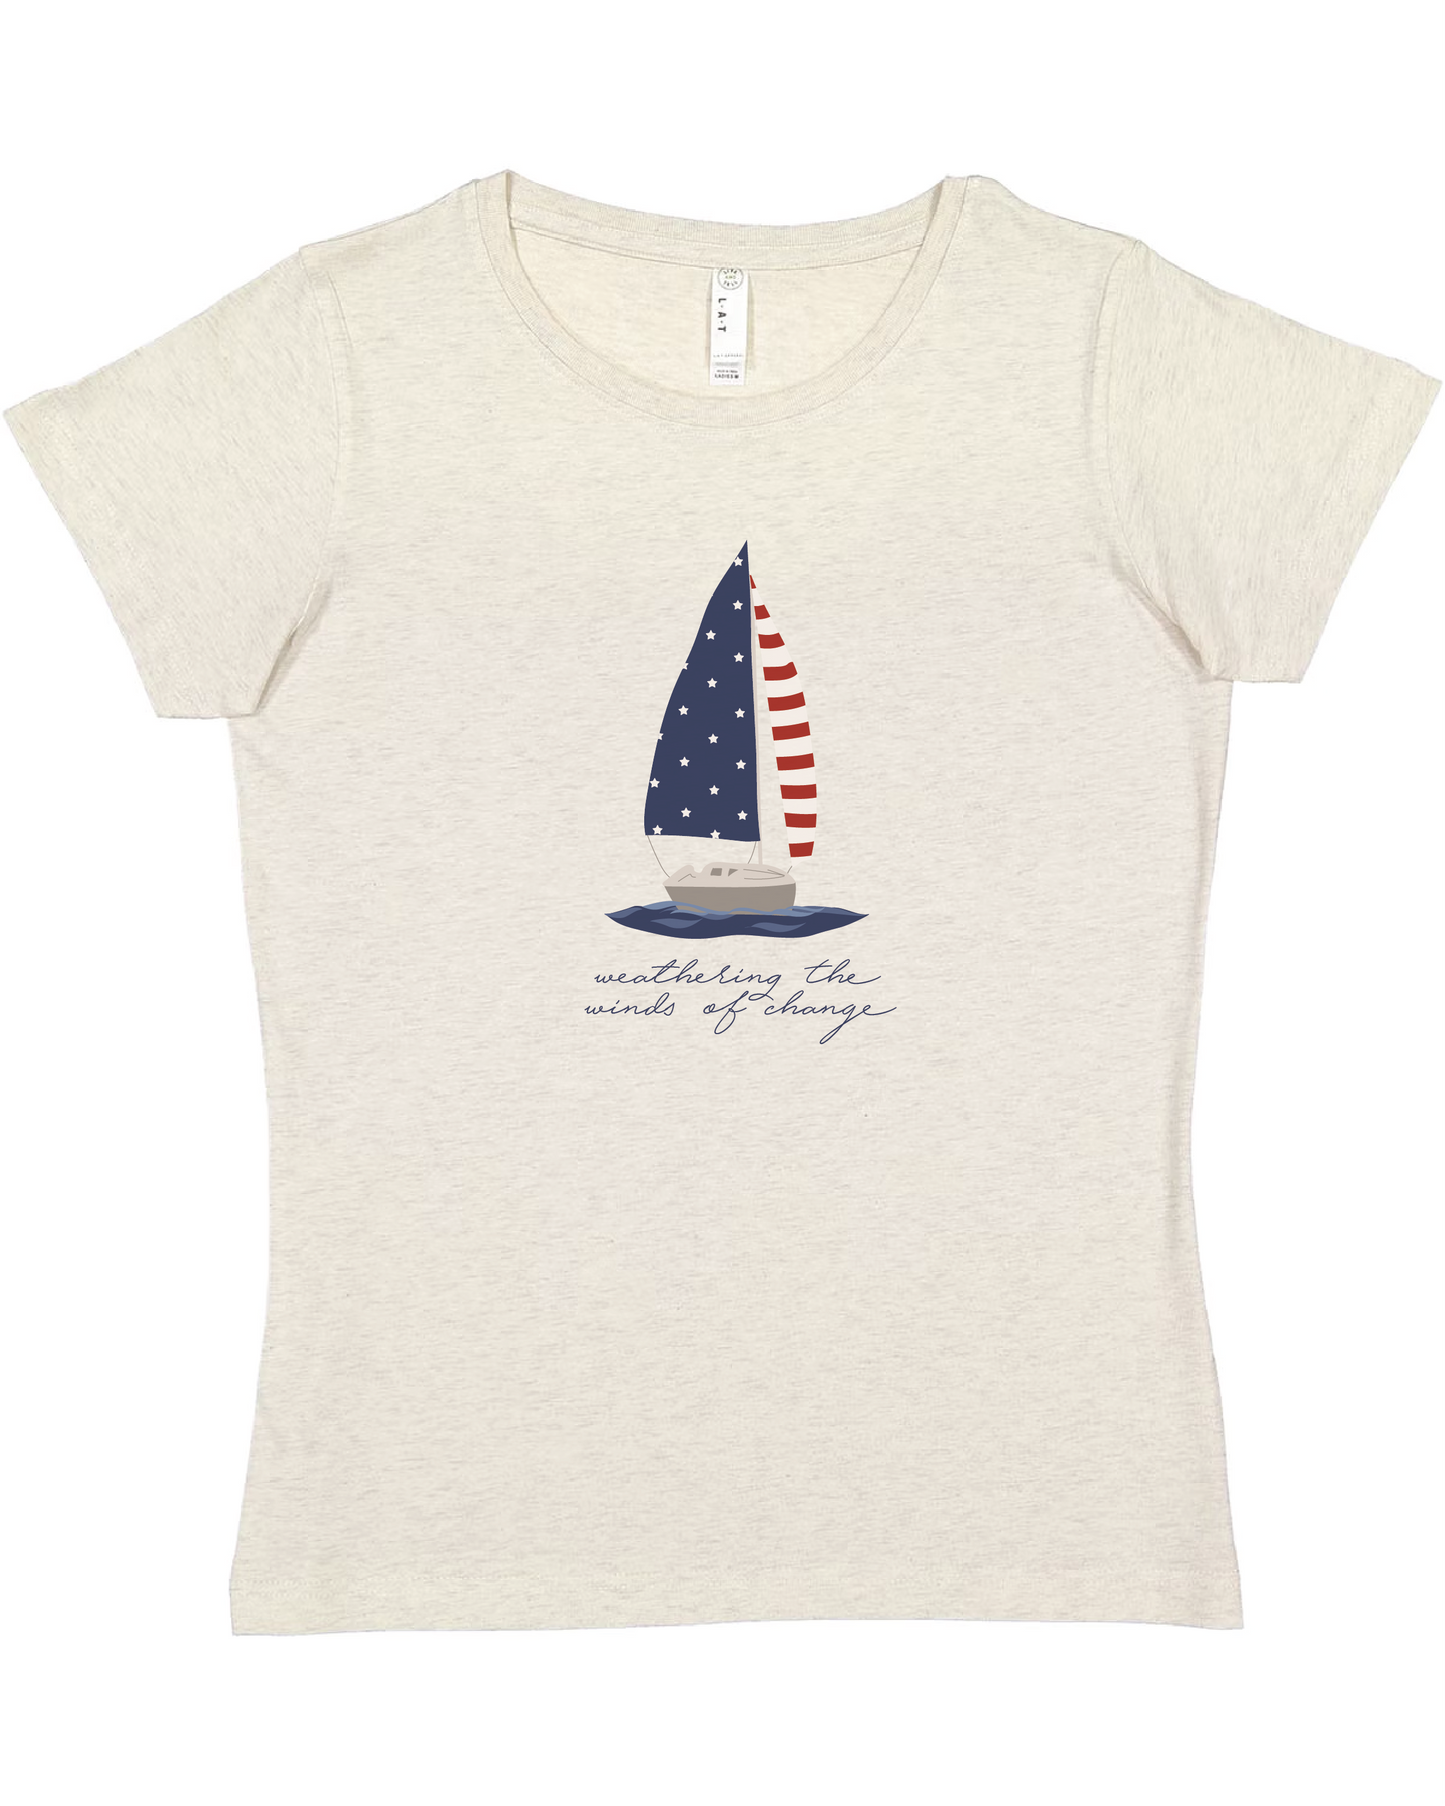 Weathering the Winds of Change Sailboat Tee